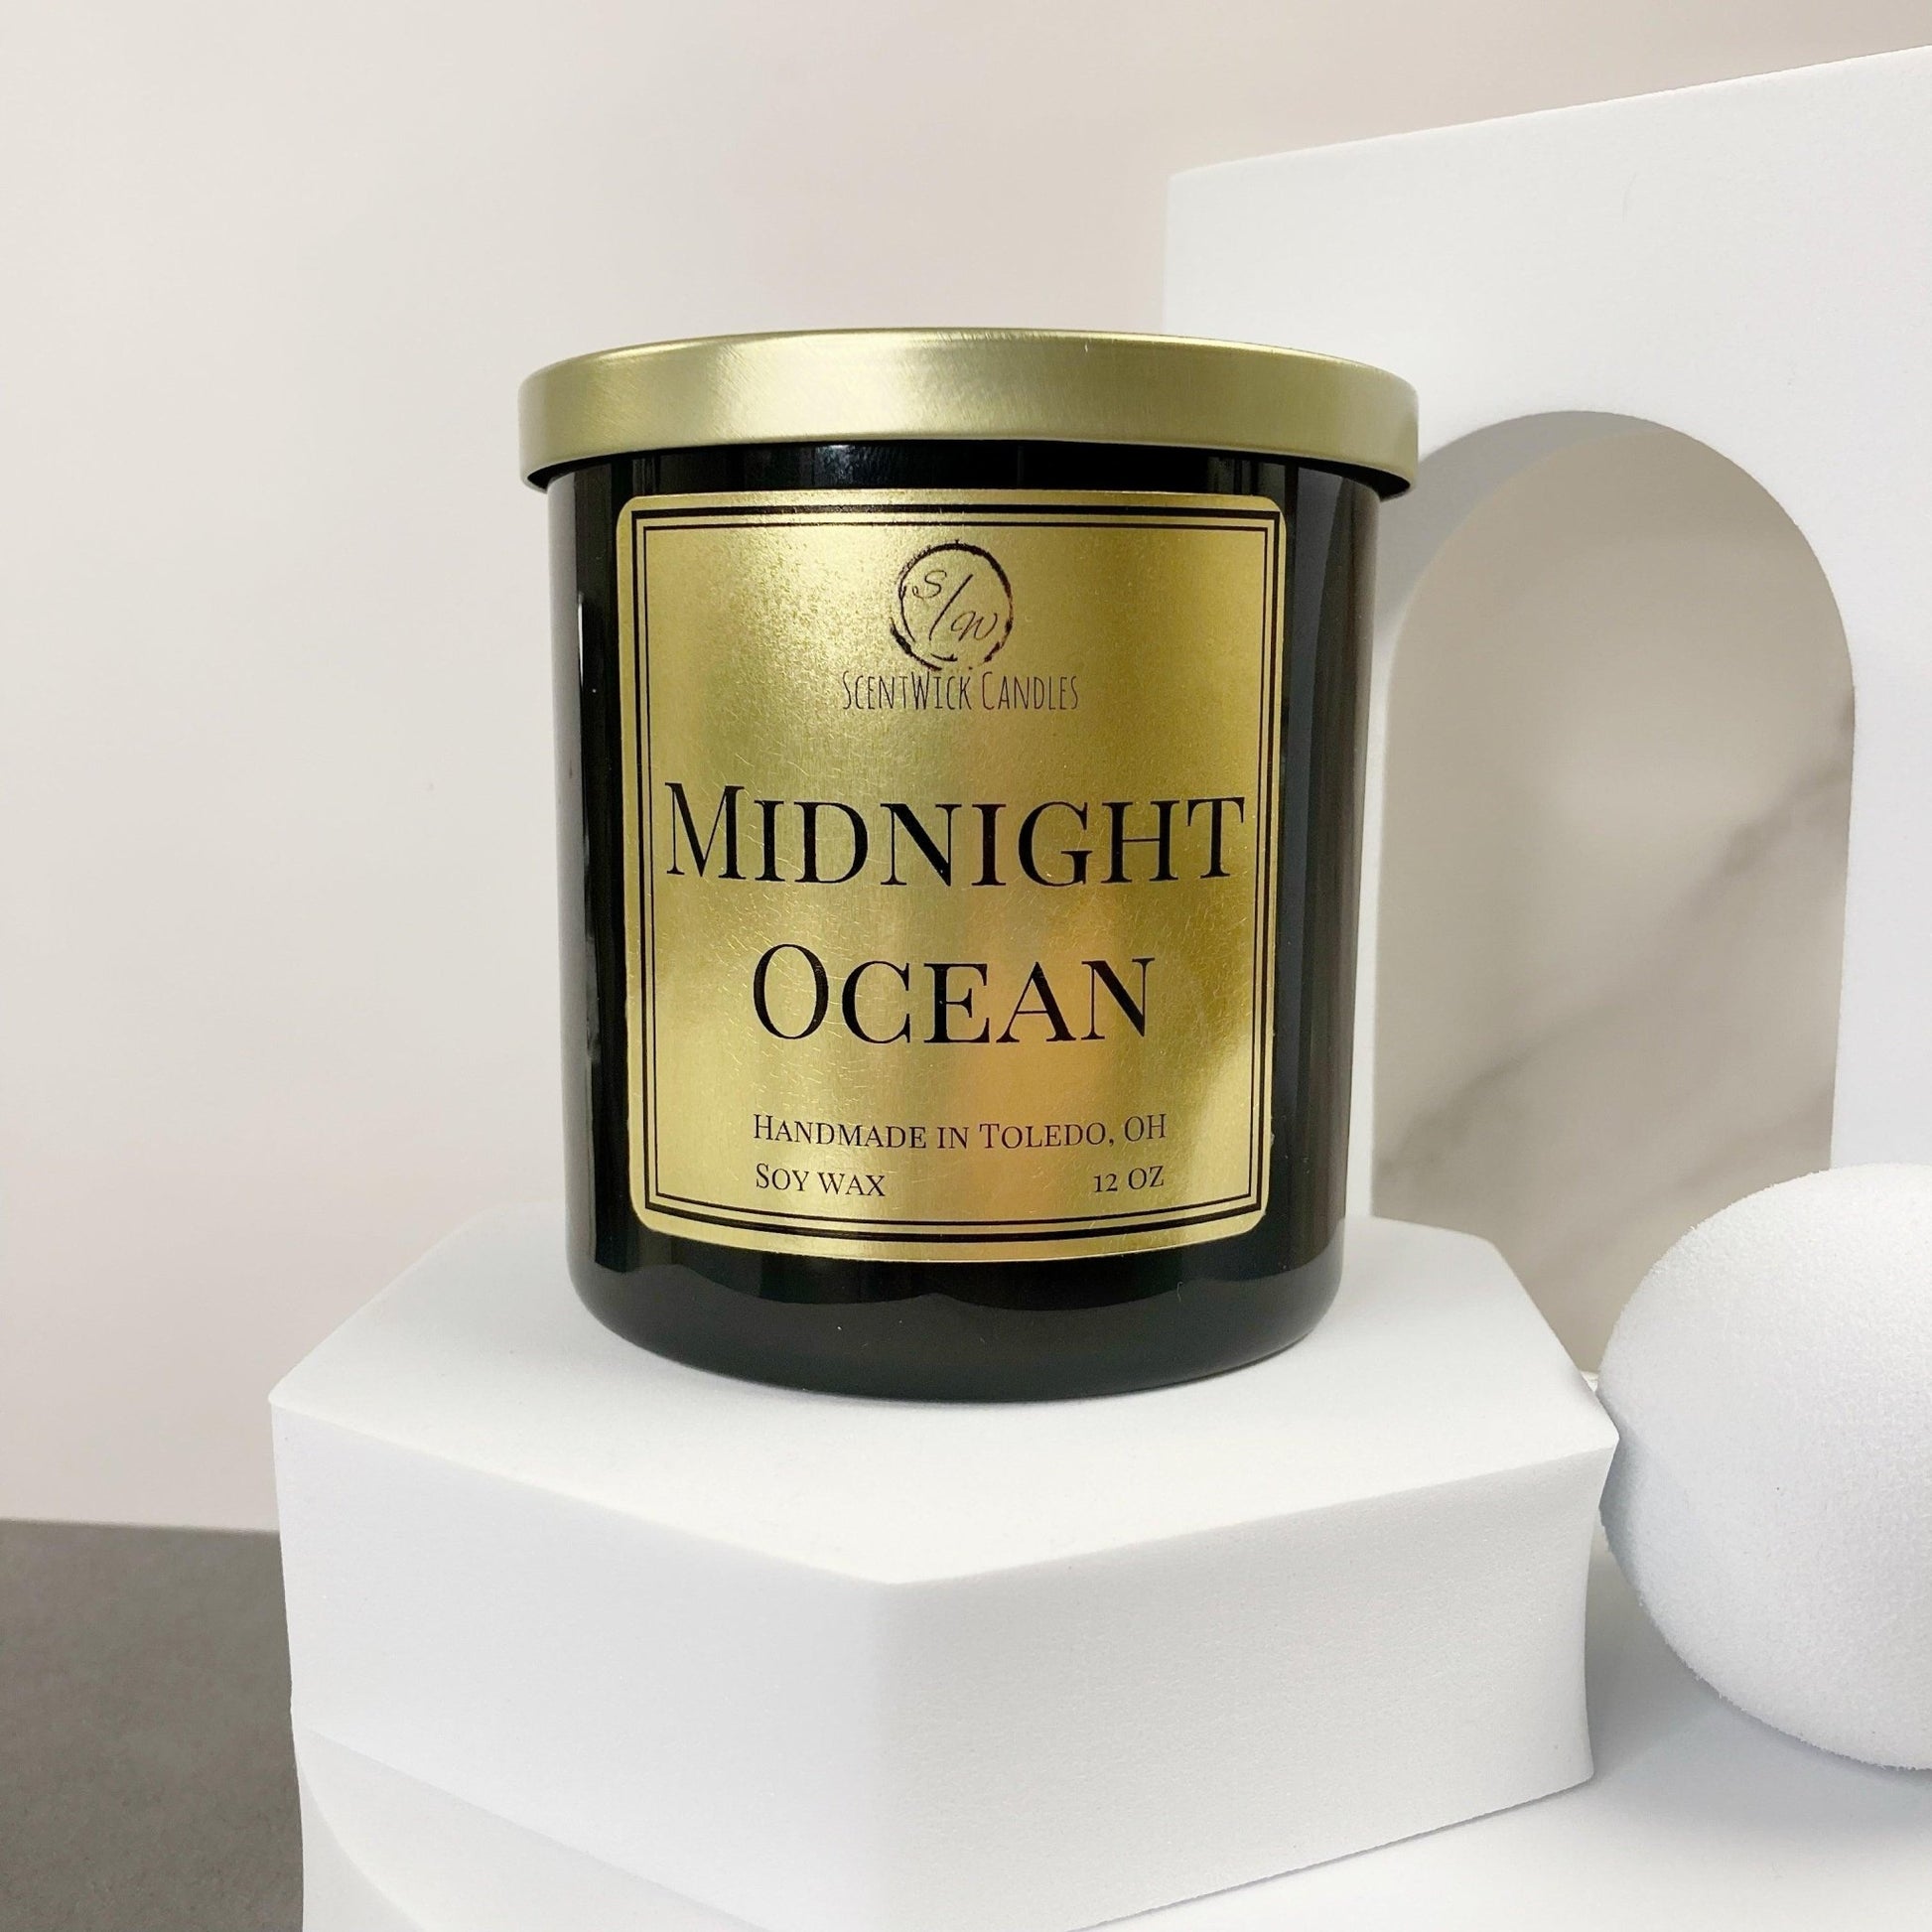 Midnight Ocean | The Copper & Gold Collection - ScentWick Candles